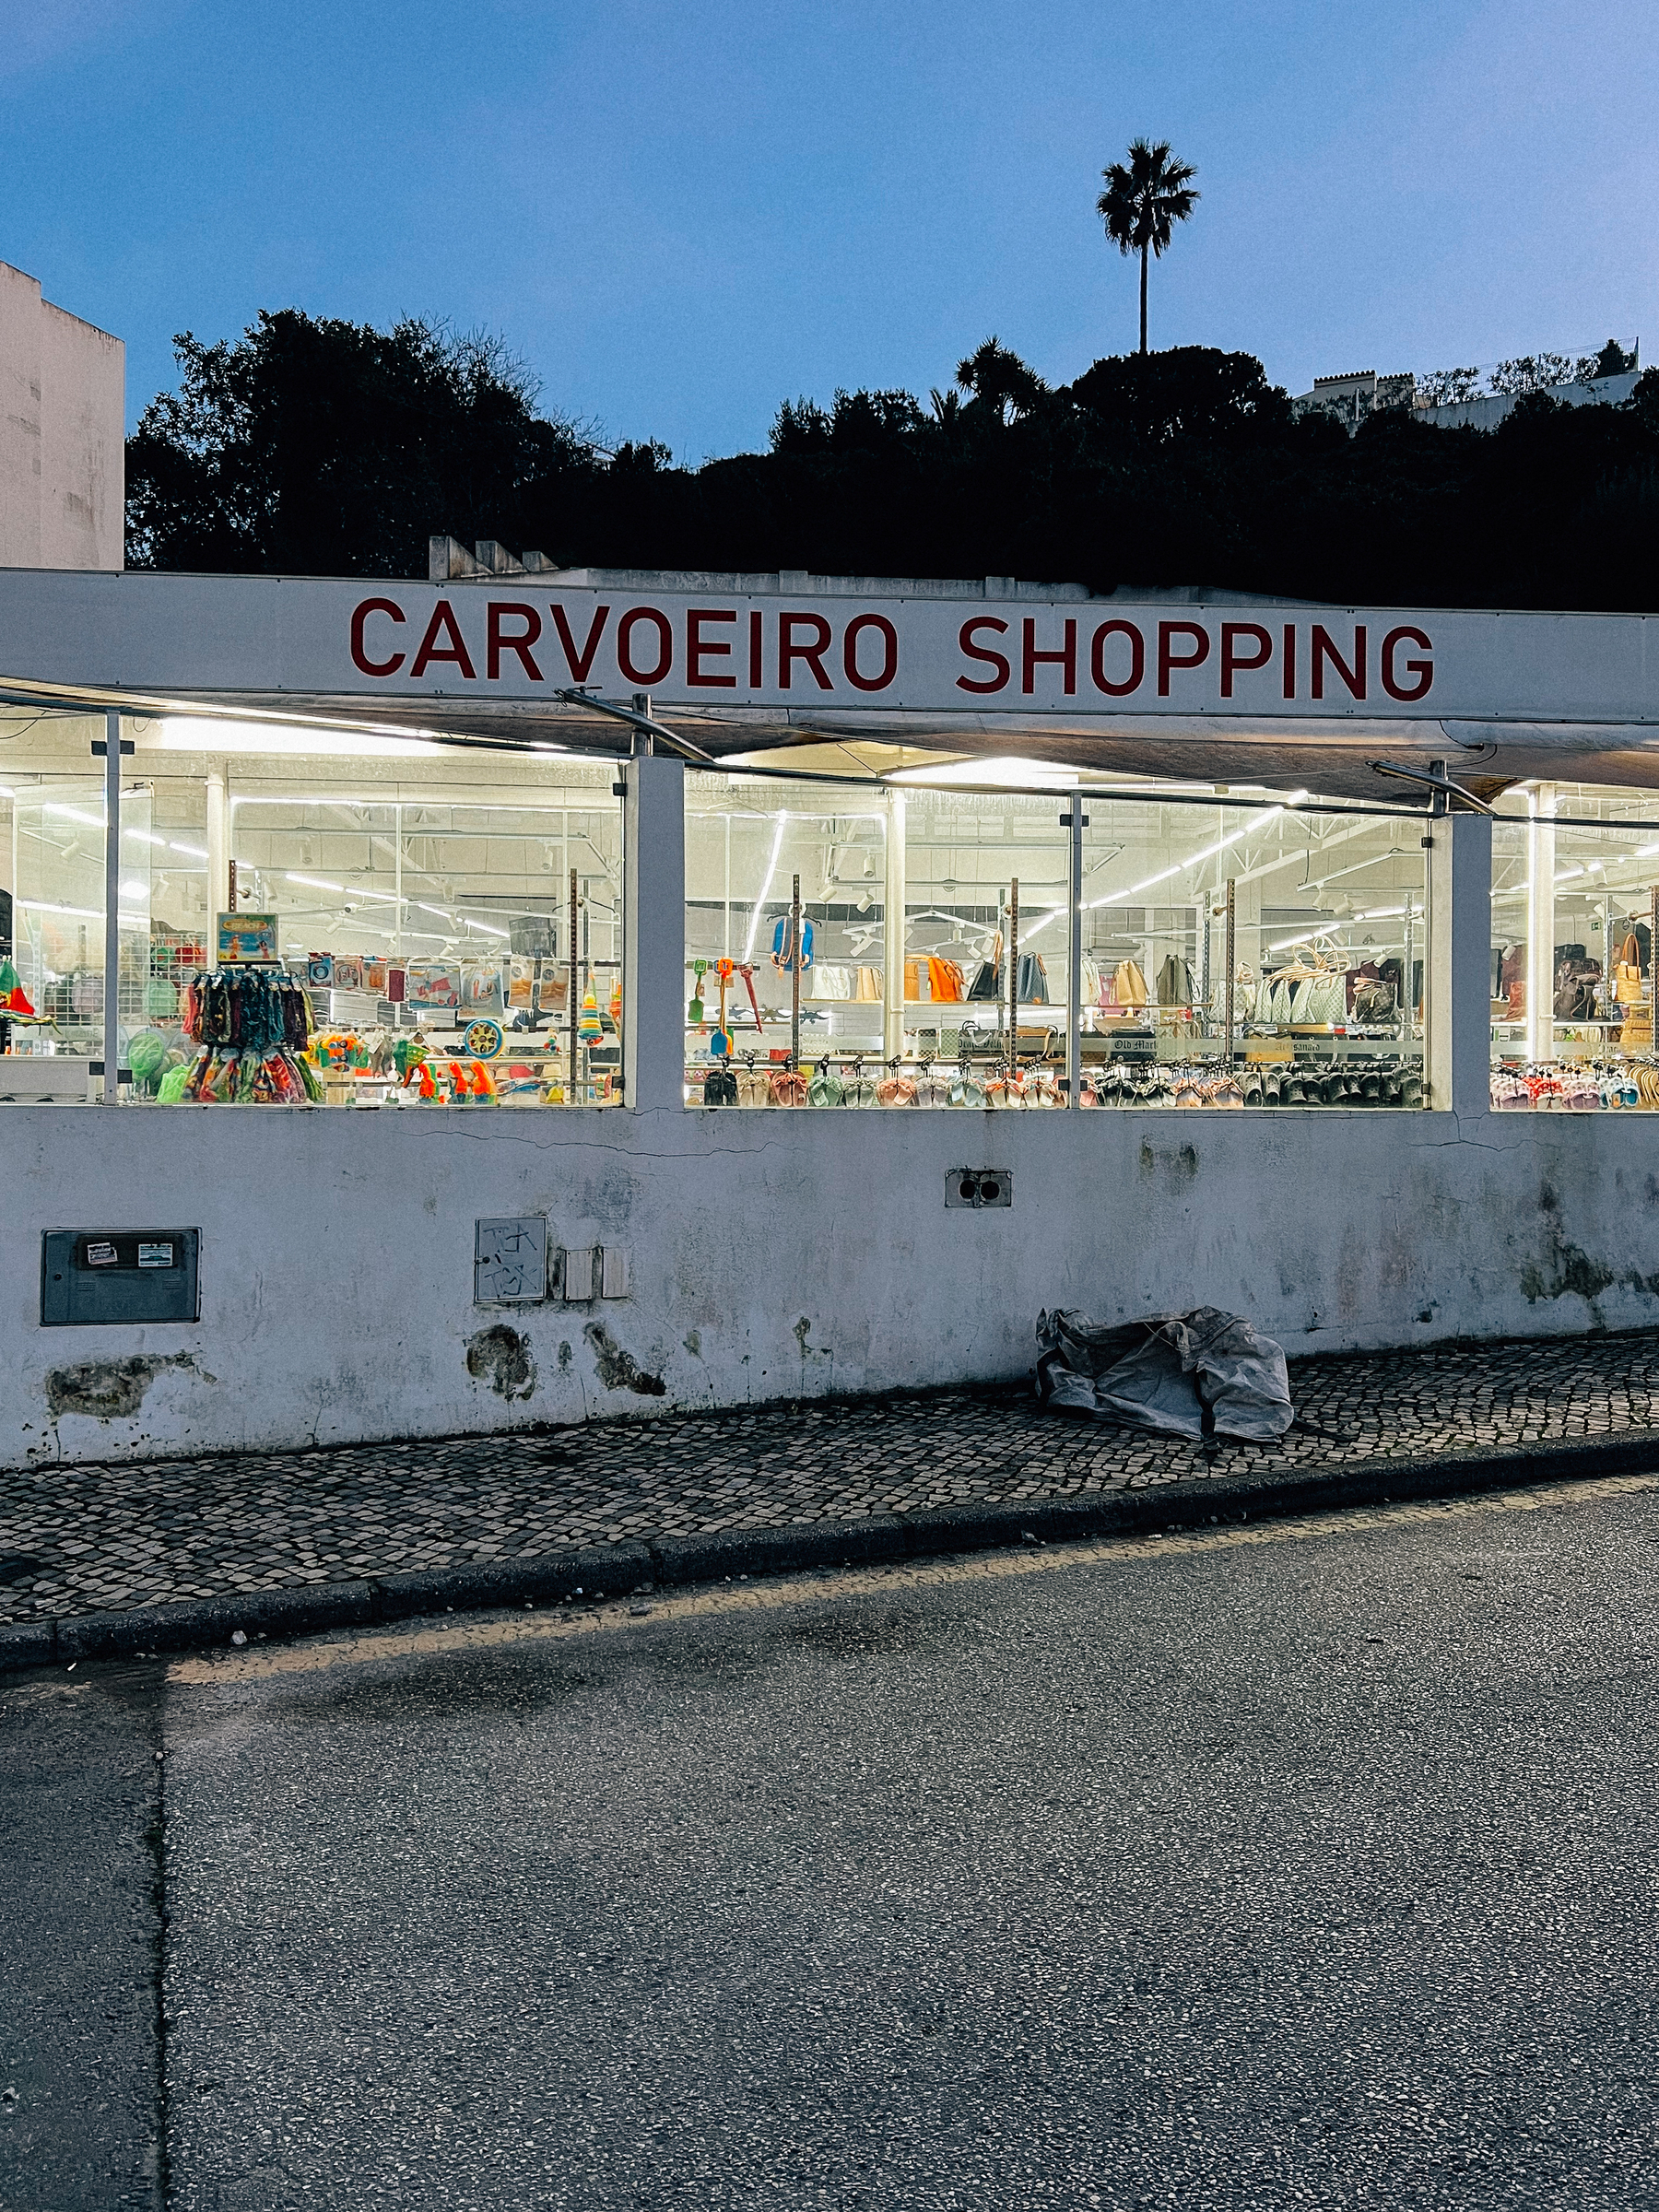 A storefront with a sign that reads &ldquo;CARVOEIRO SHOPPING,&rdquo; featuring a large glass facade through which various items on display can be seen, set against a backdrop of a clear sky with a solitary palm tree.